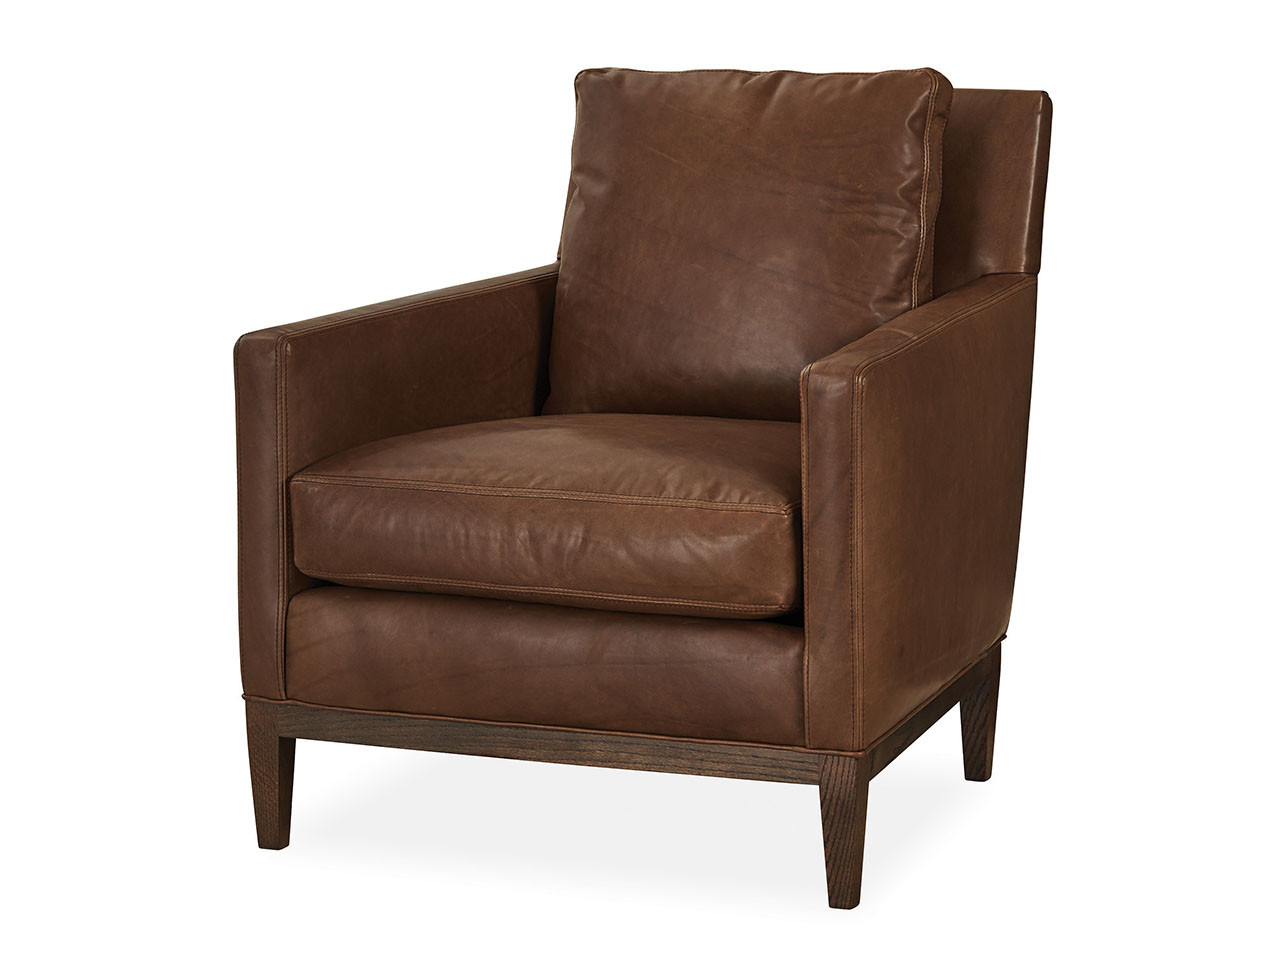 Welles Leather Chair Country Willow